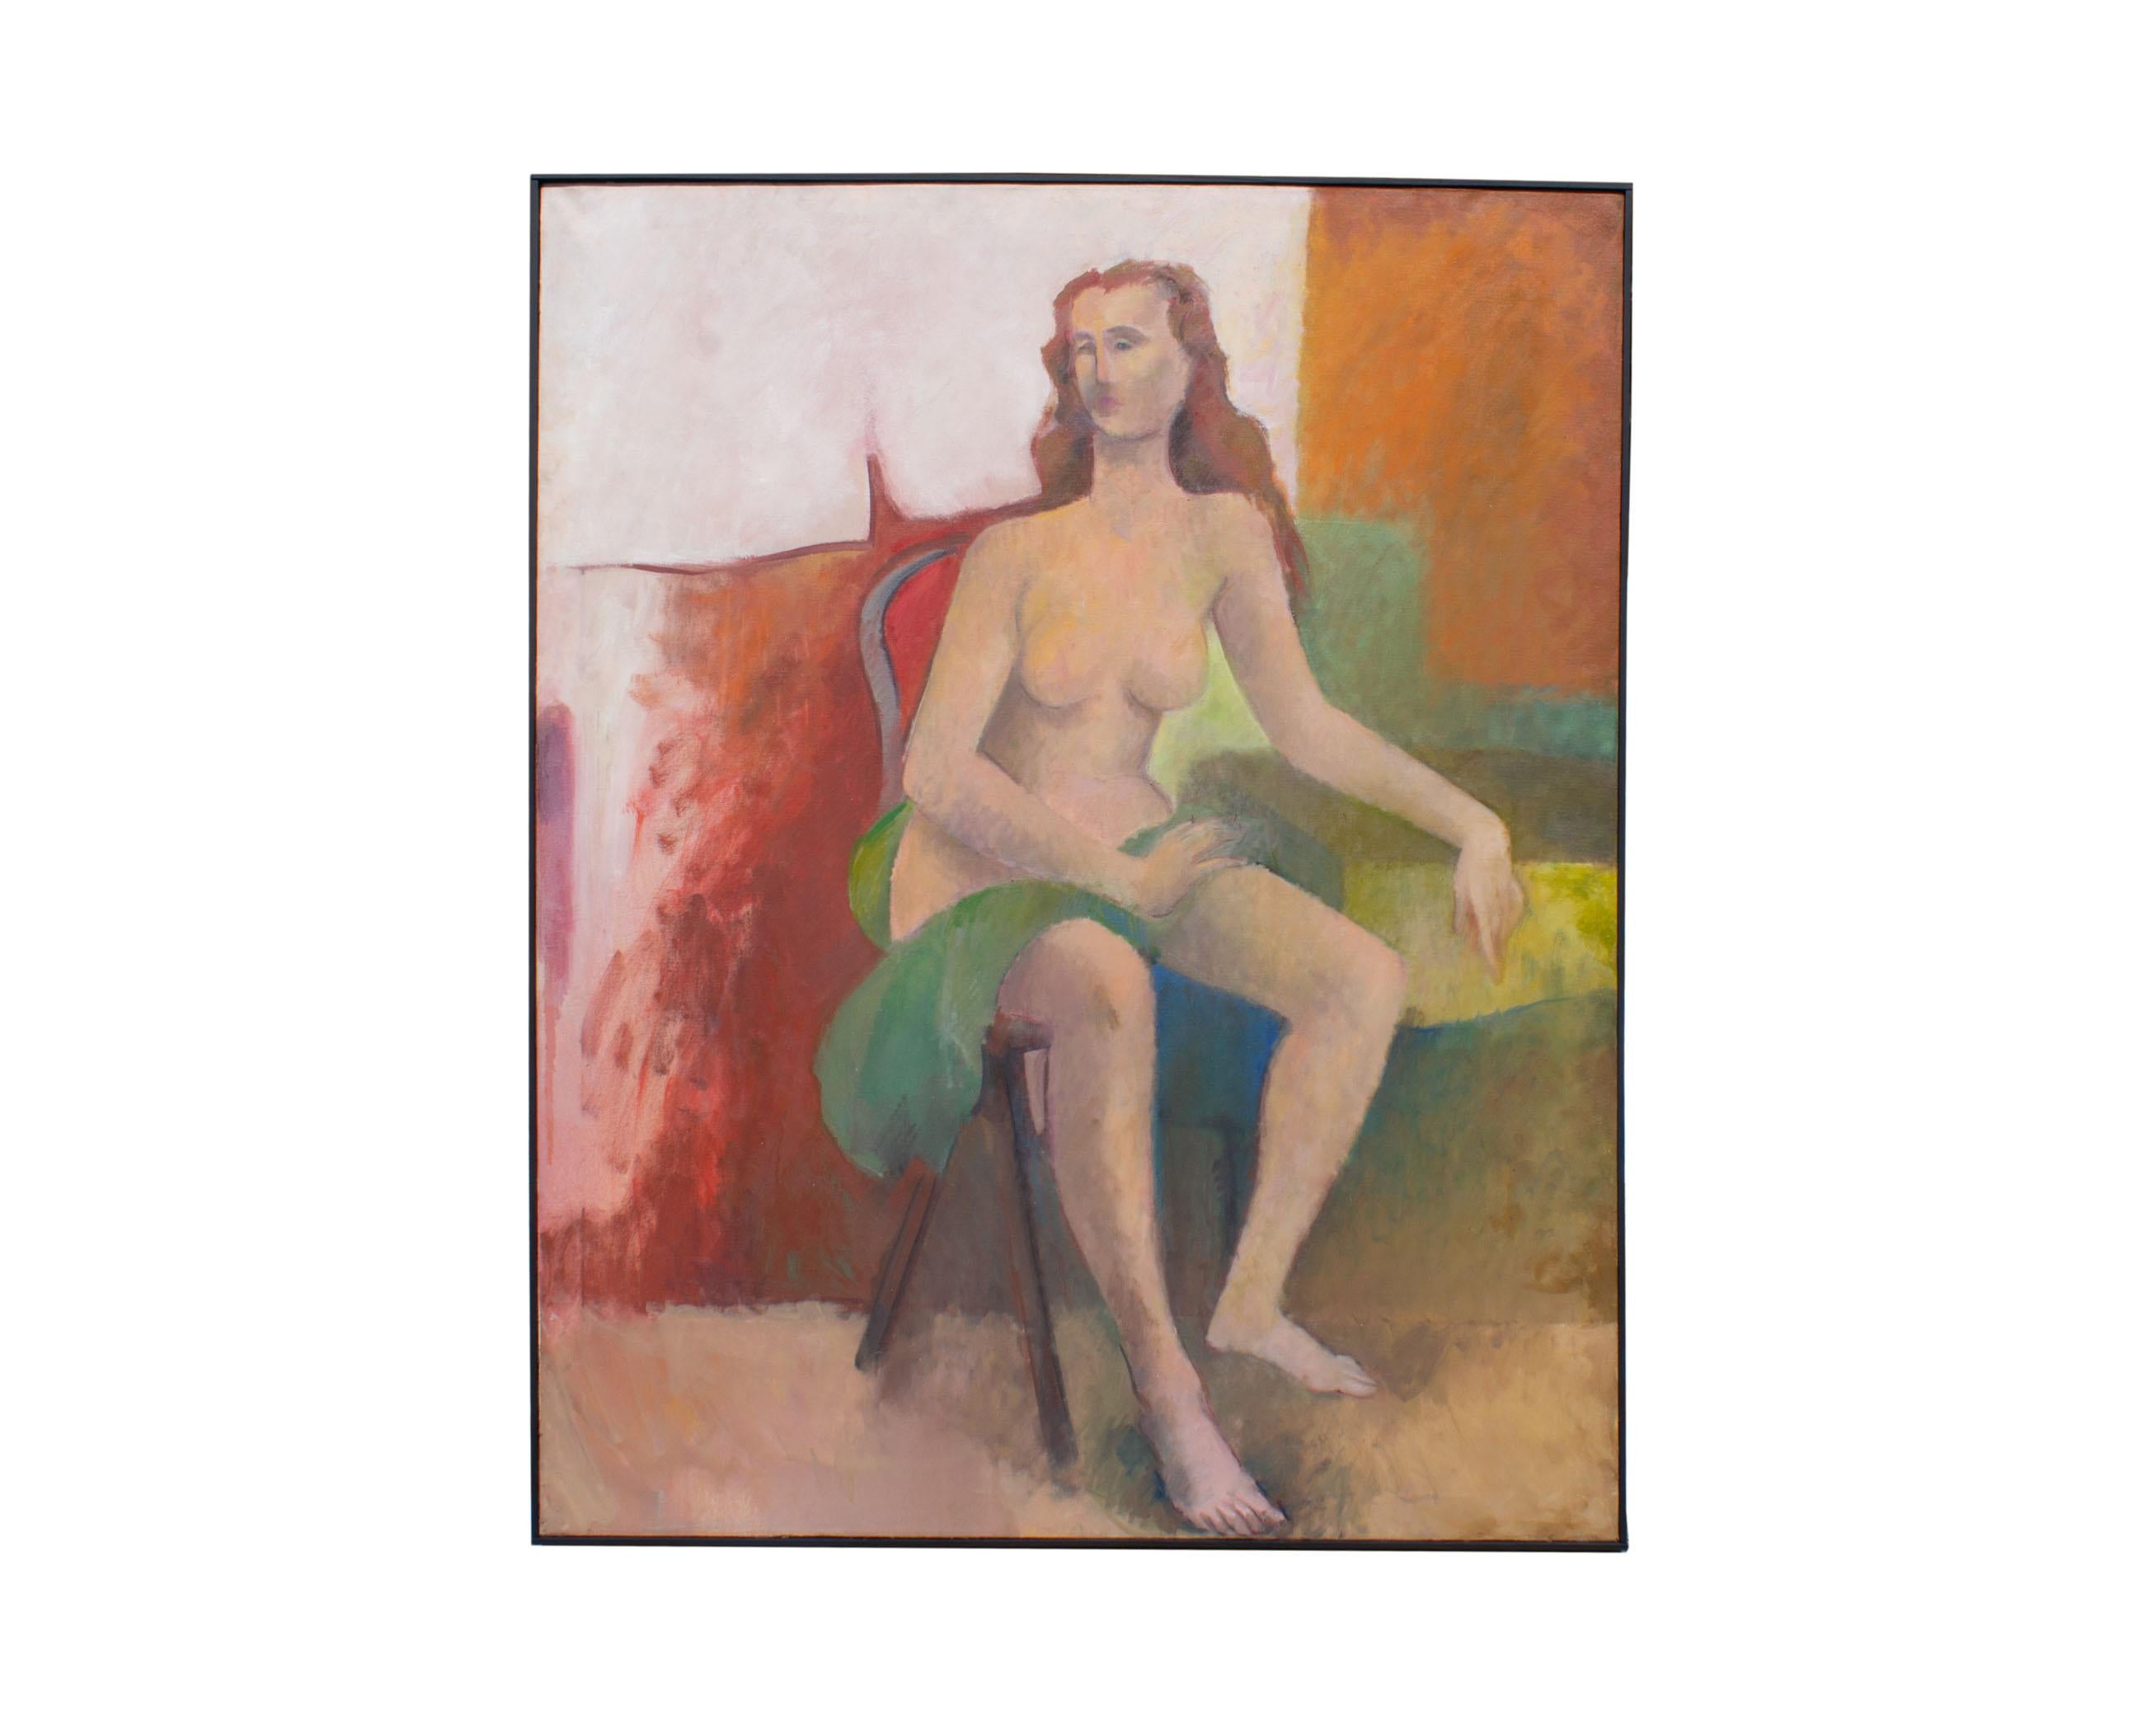 A 1959 abstract oil on canvas painting by the American artist Walter Stomps (1929-2020). Titled Seated Nude, the painting depicts a seated nude female figure with wavy brown-red sitting on a bentwood chair. To the back of the figure fades an